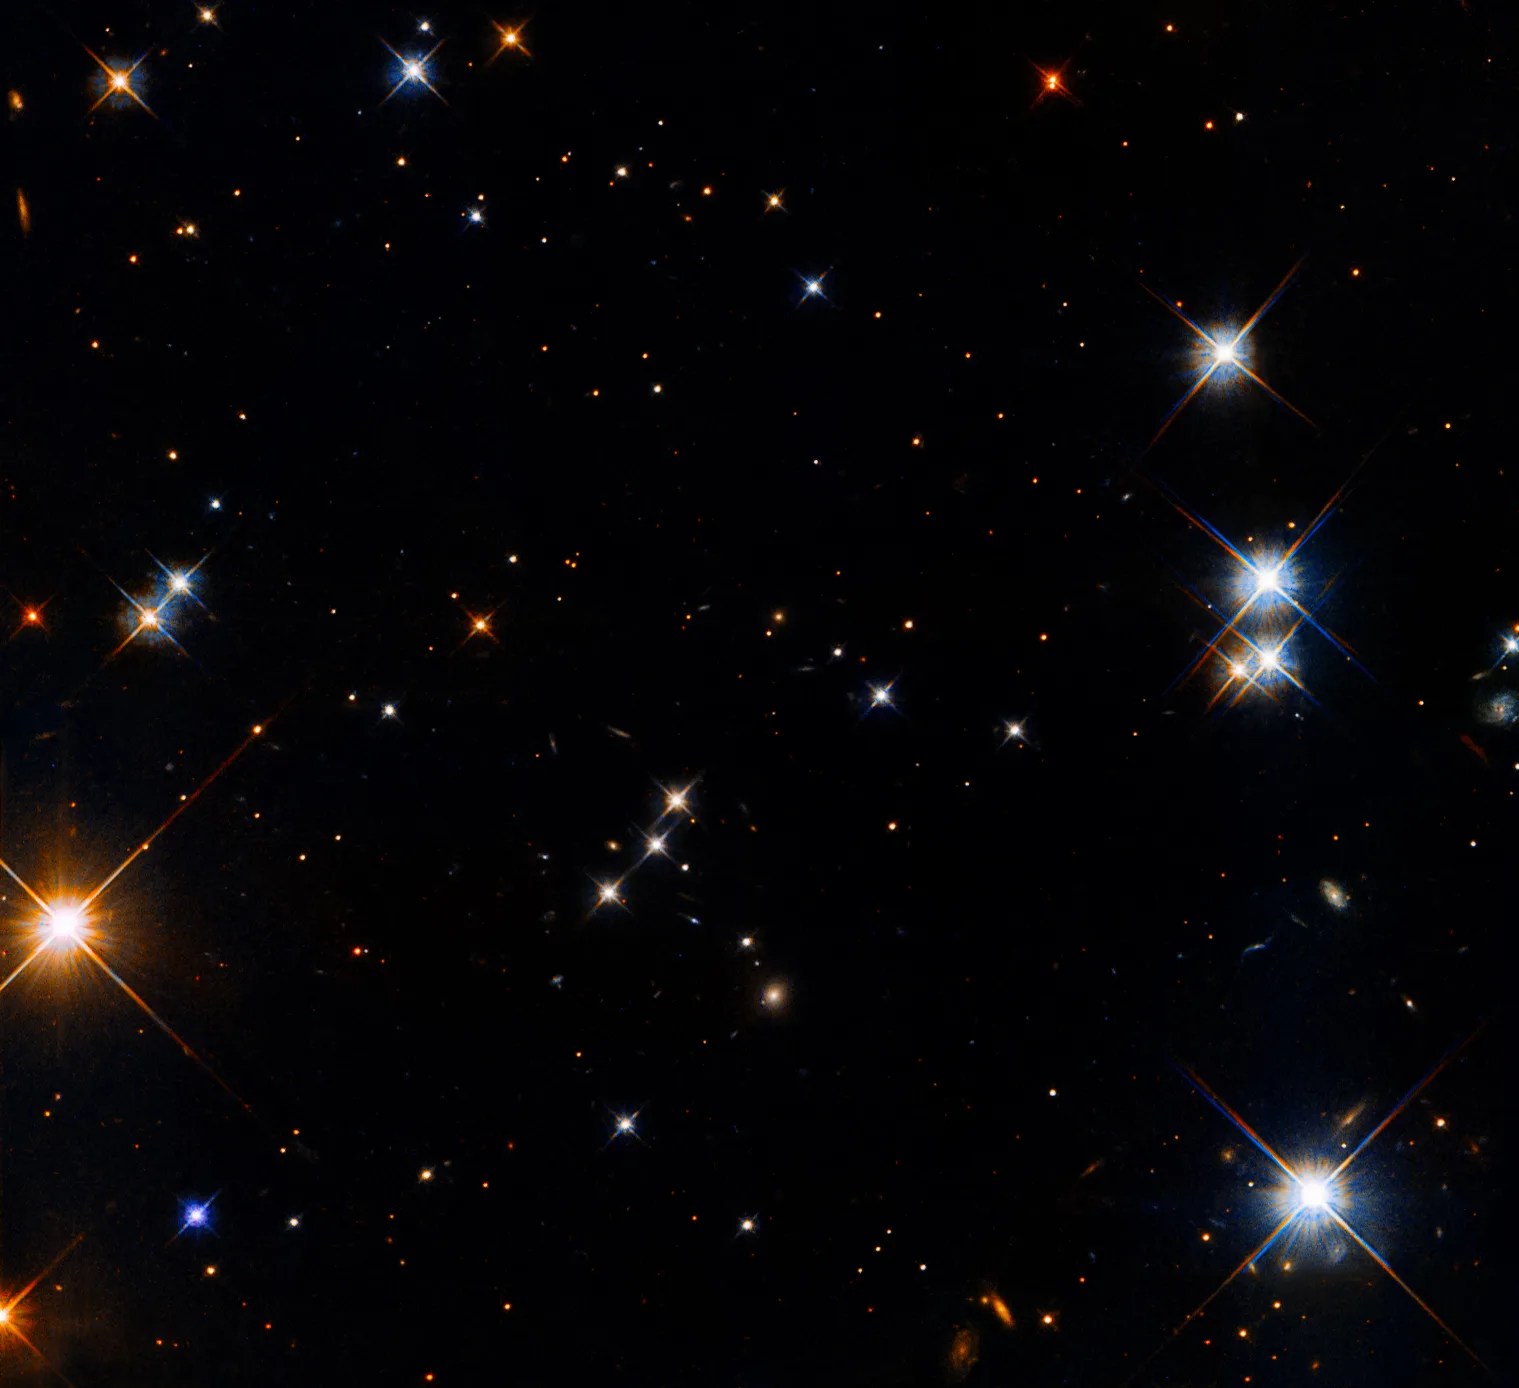 Scattered white and reddish stars on a black background, with the largest and brightest stars to the left and right of the image.